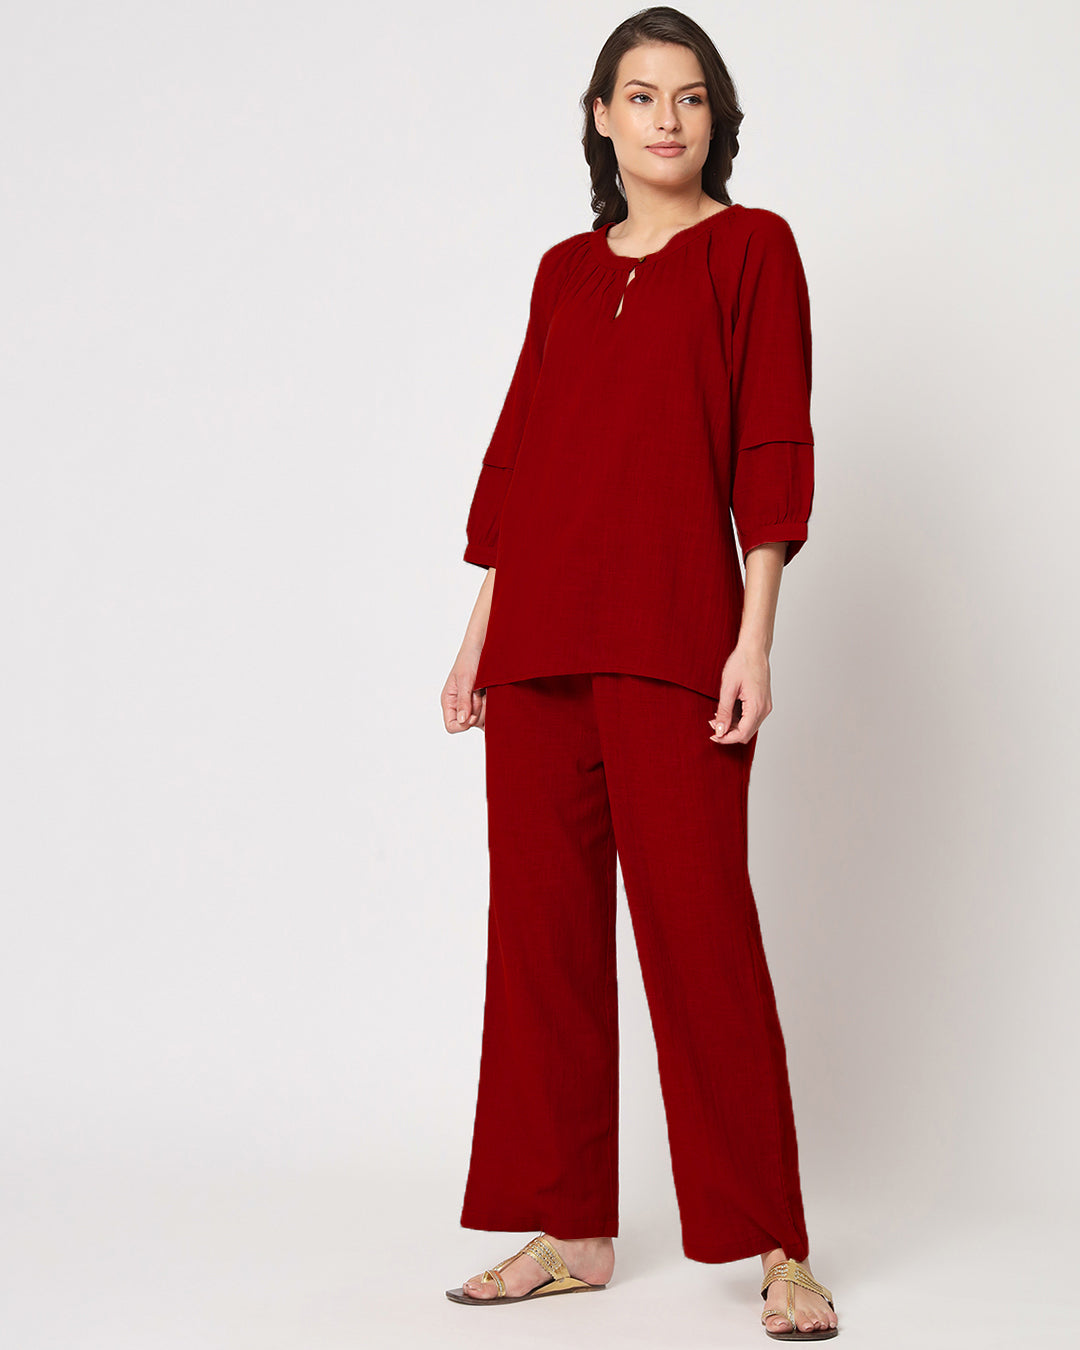 Classic Red Button Neck Solid Top (Without Bottoms)